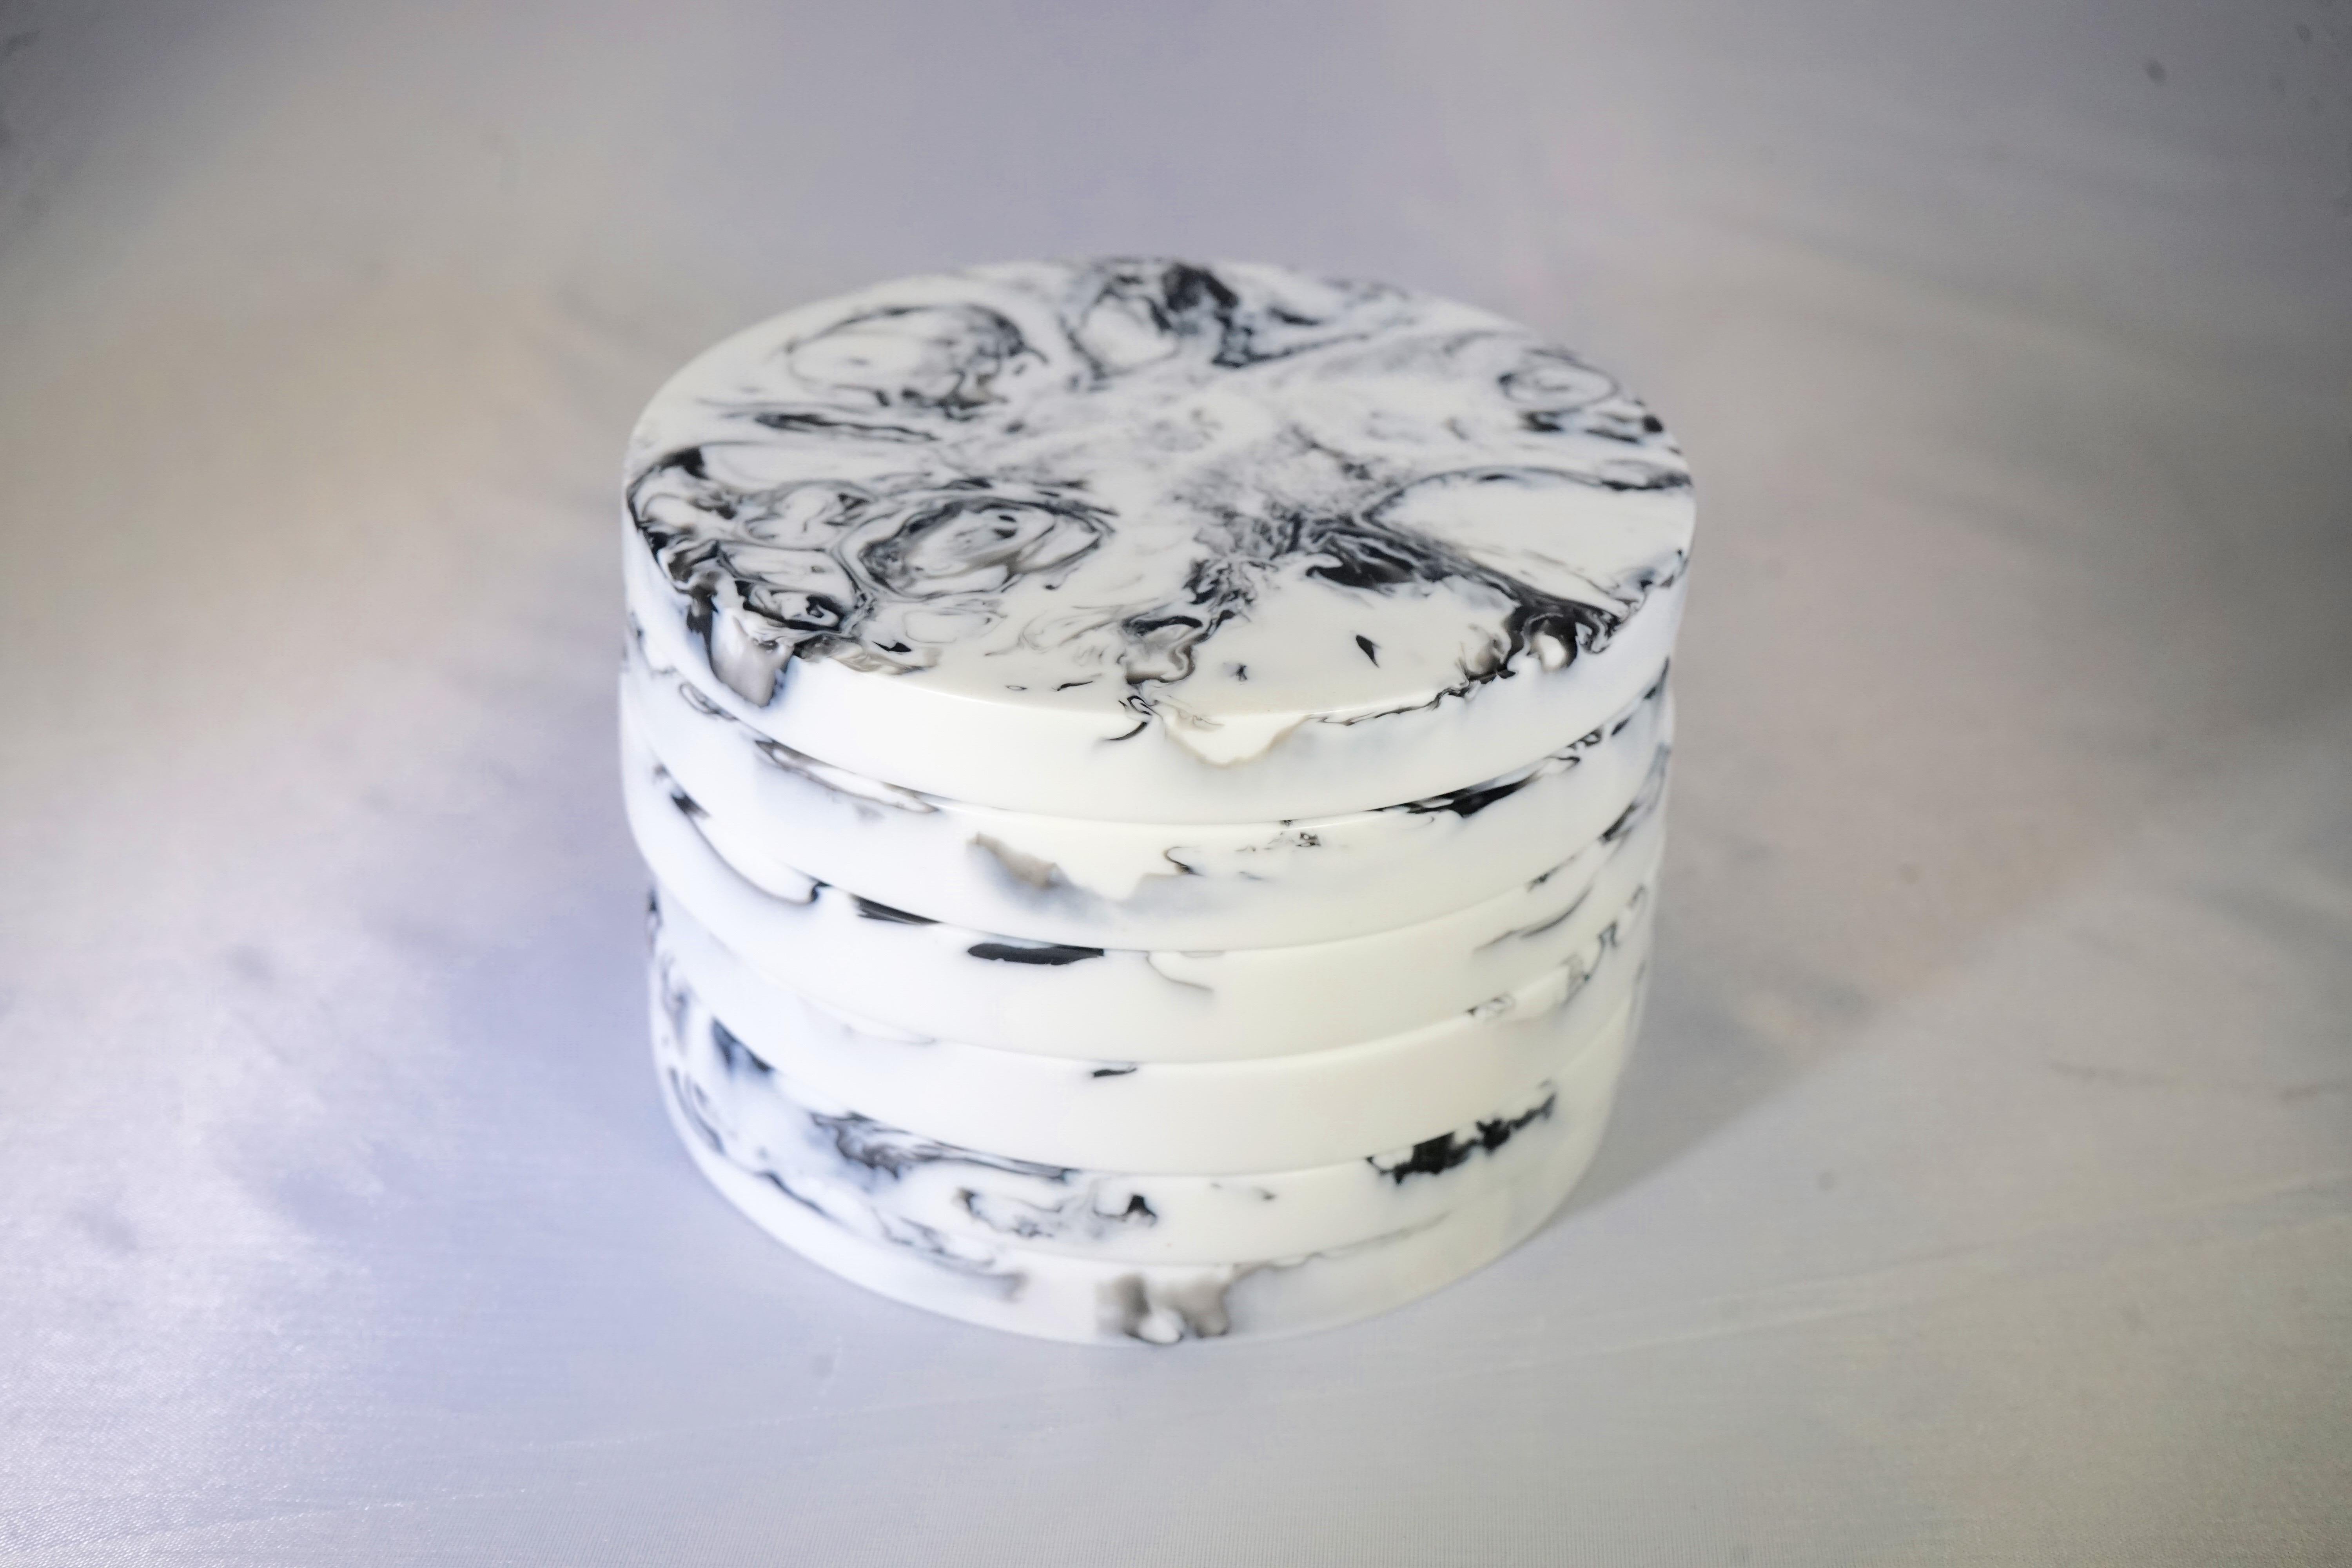 Contemporary coasters in a set of six, with black and white swirled resin by CDMX Design. Brand new.